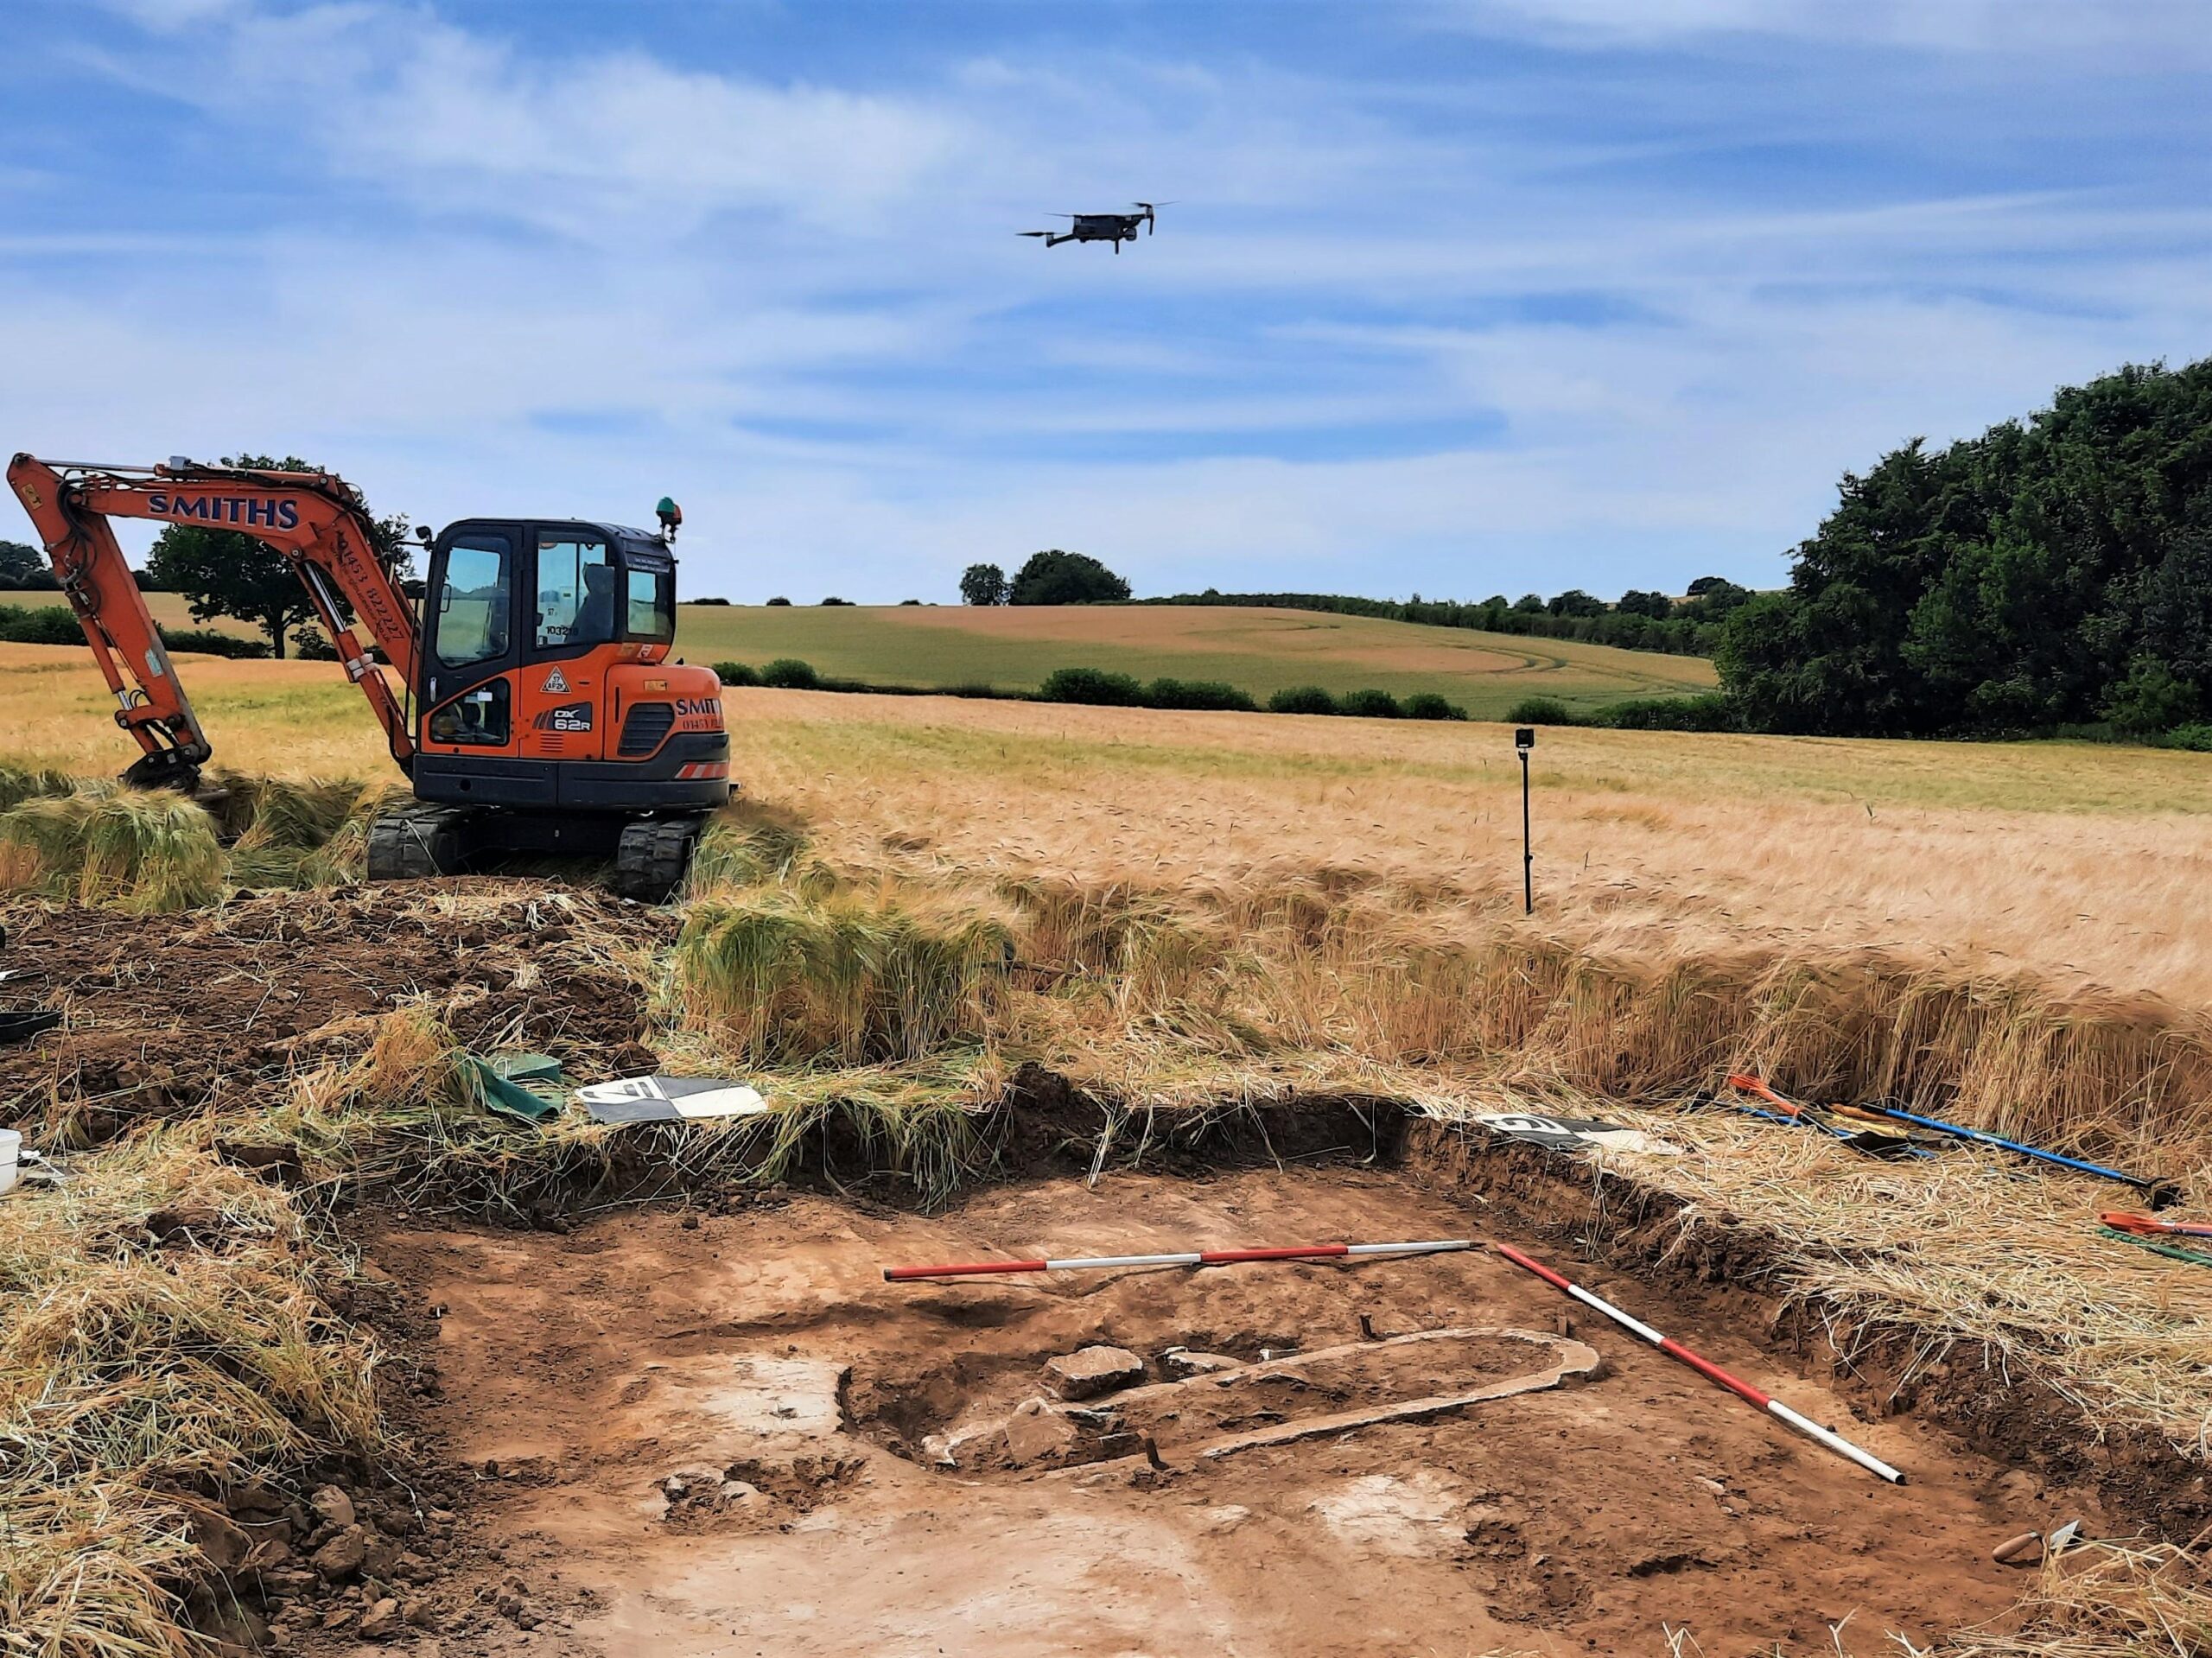 The Use of Drones (UAV) in Modern Archaeology